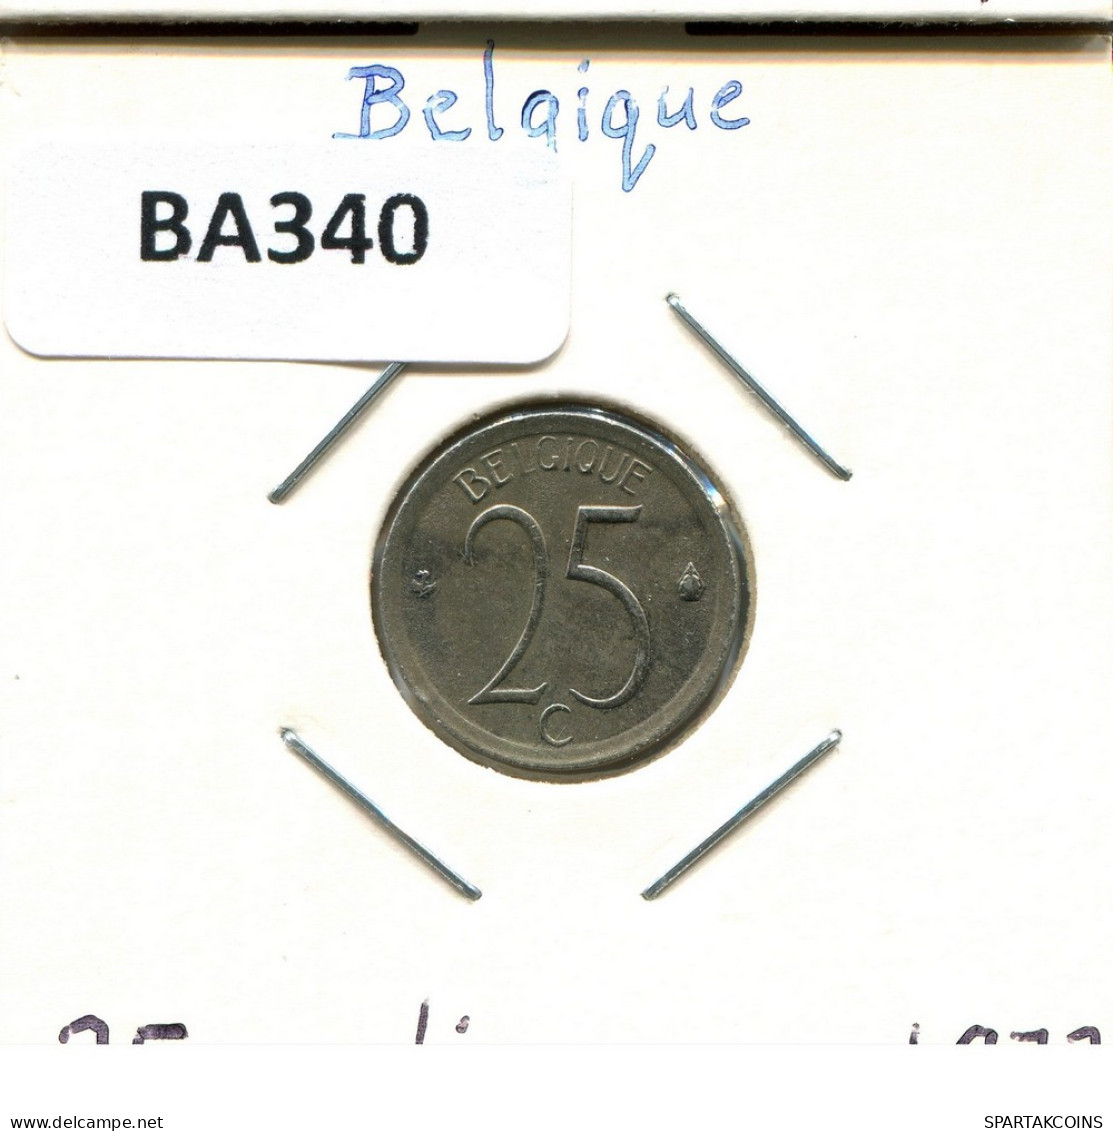 25 CENTIMES 1973 FRENCH Text BELGIUM Coin #BA340.U - 25 Cent